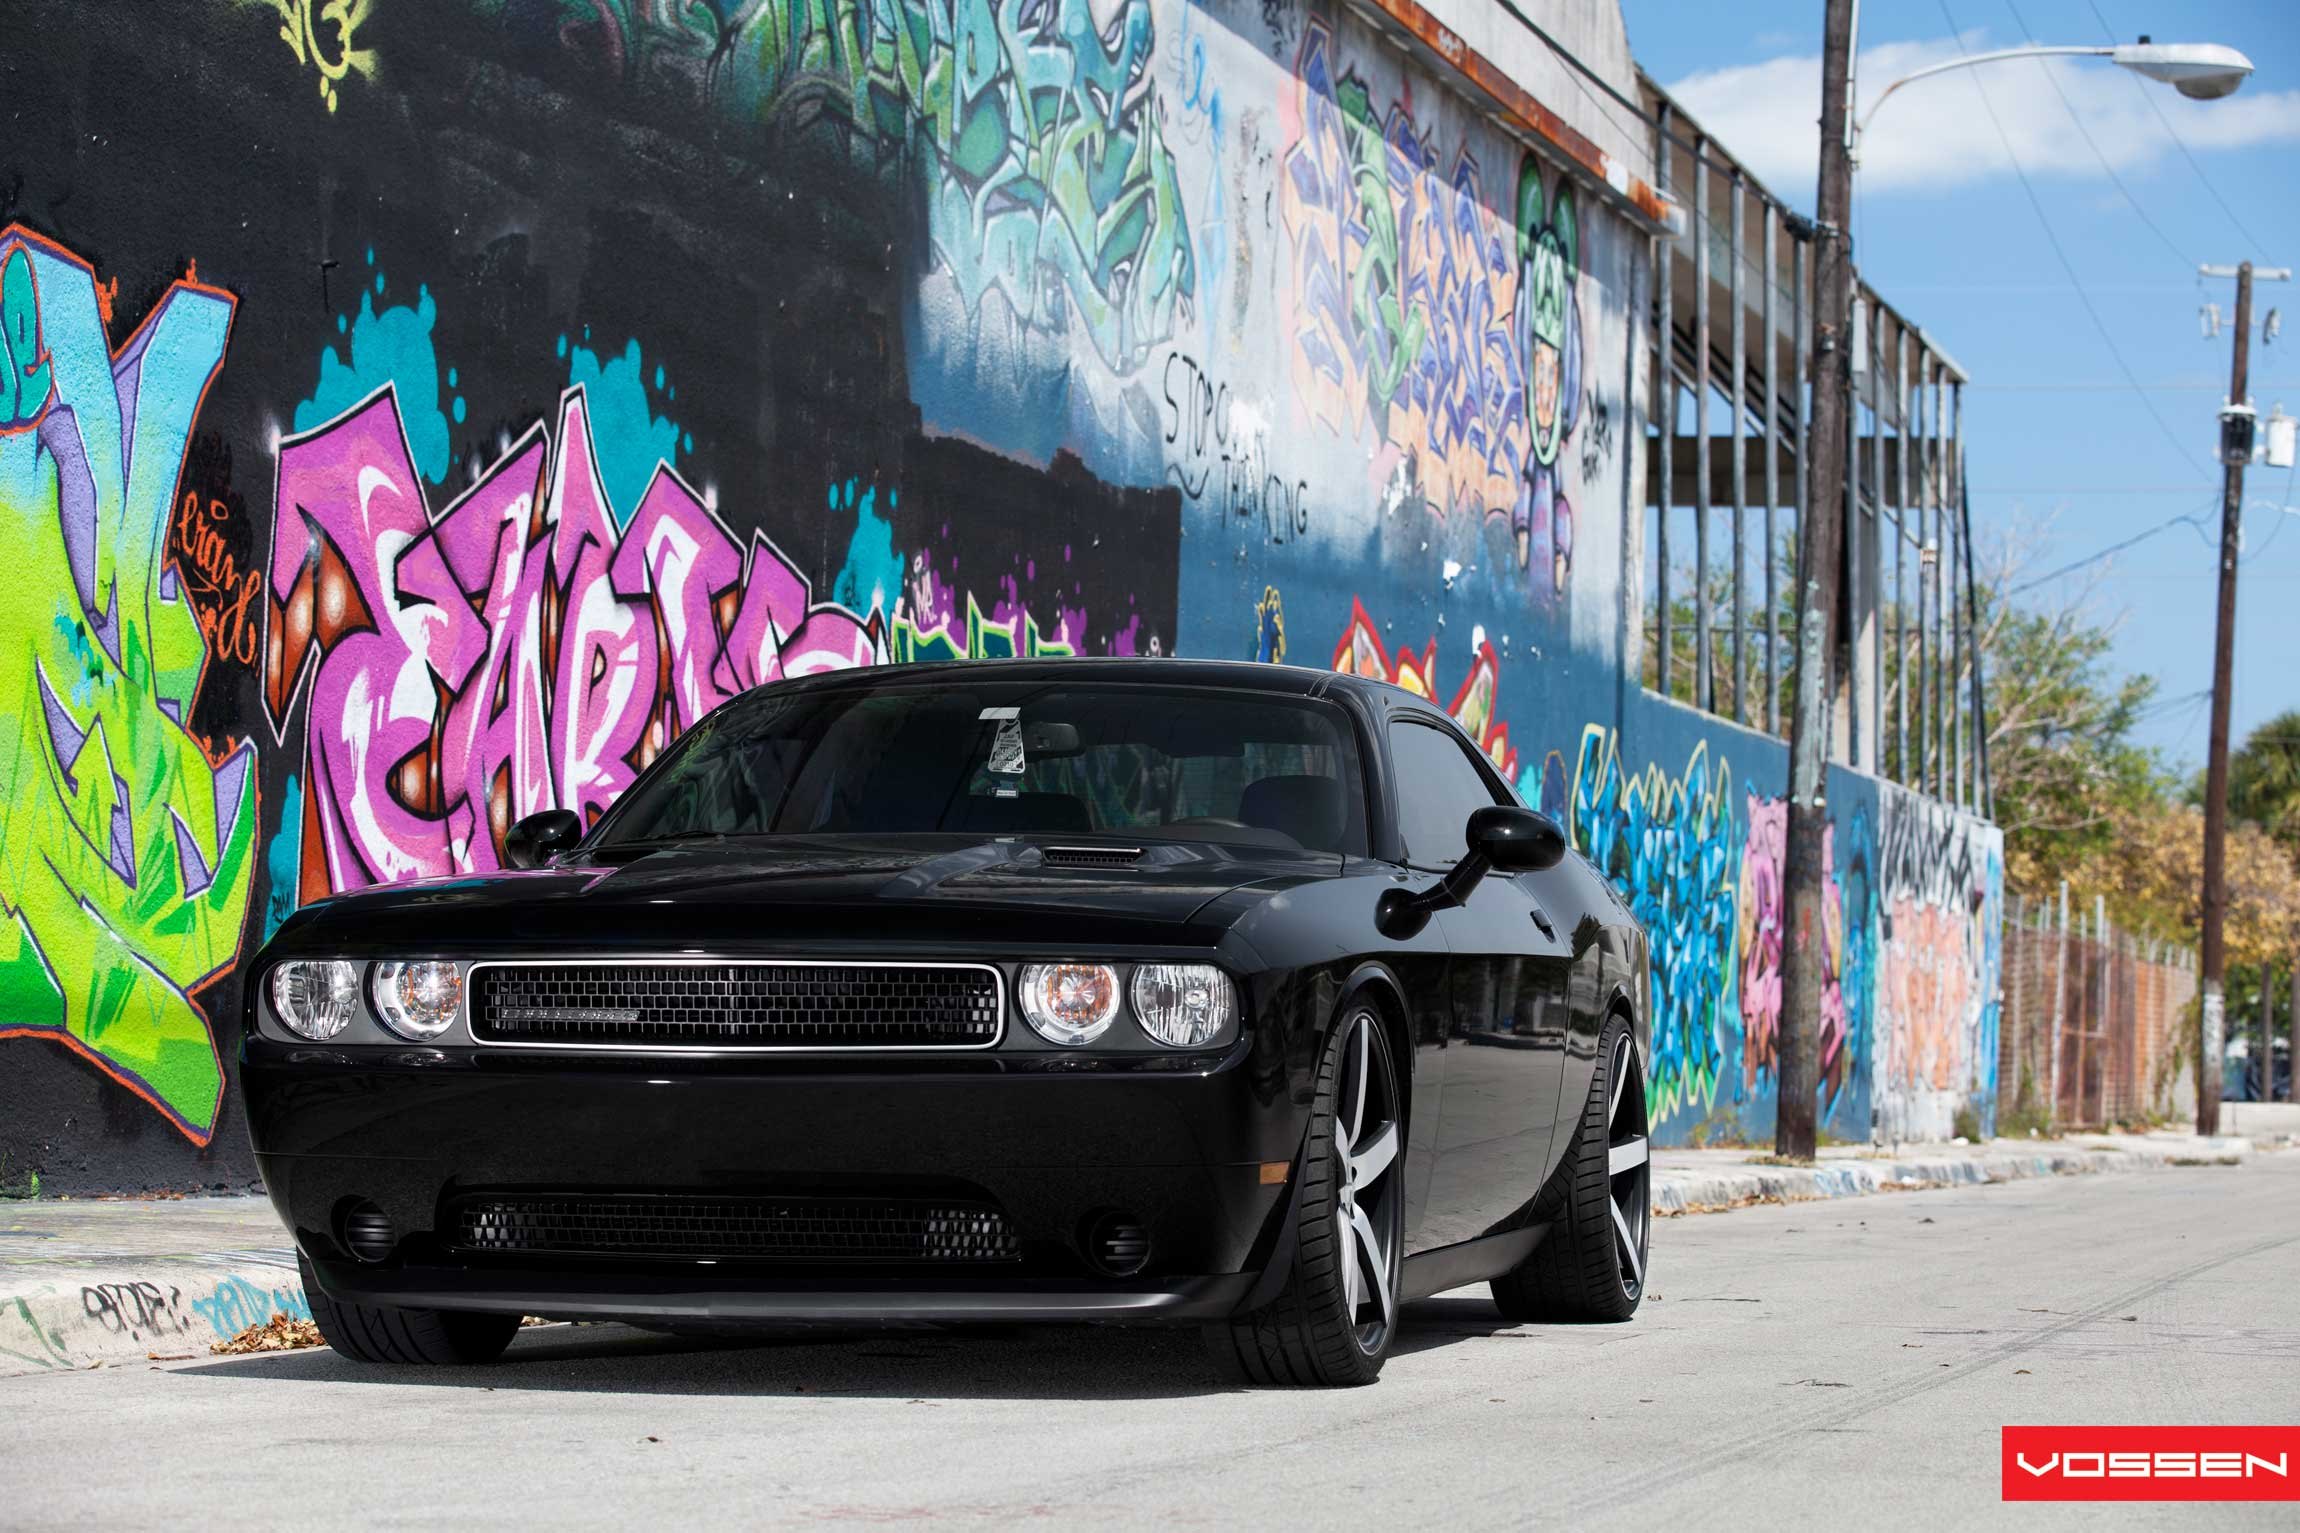 Custom Hood with Air Vents on Dodge Challenger - Photo by Vossen